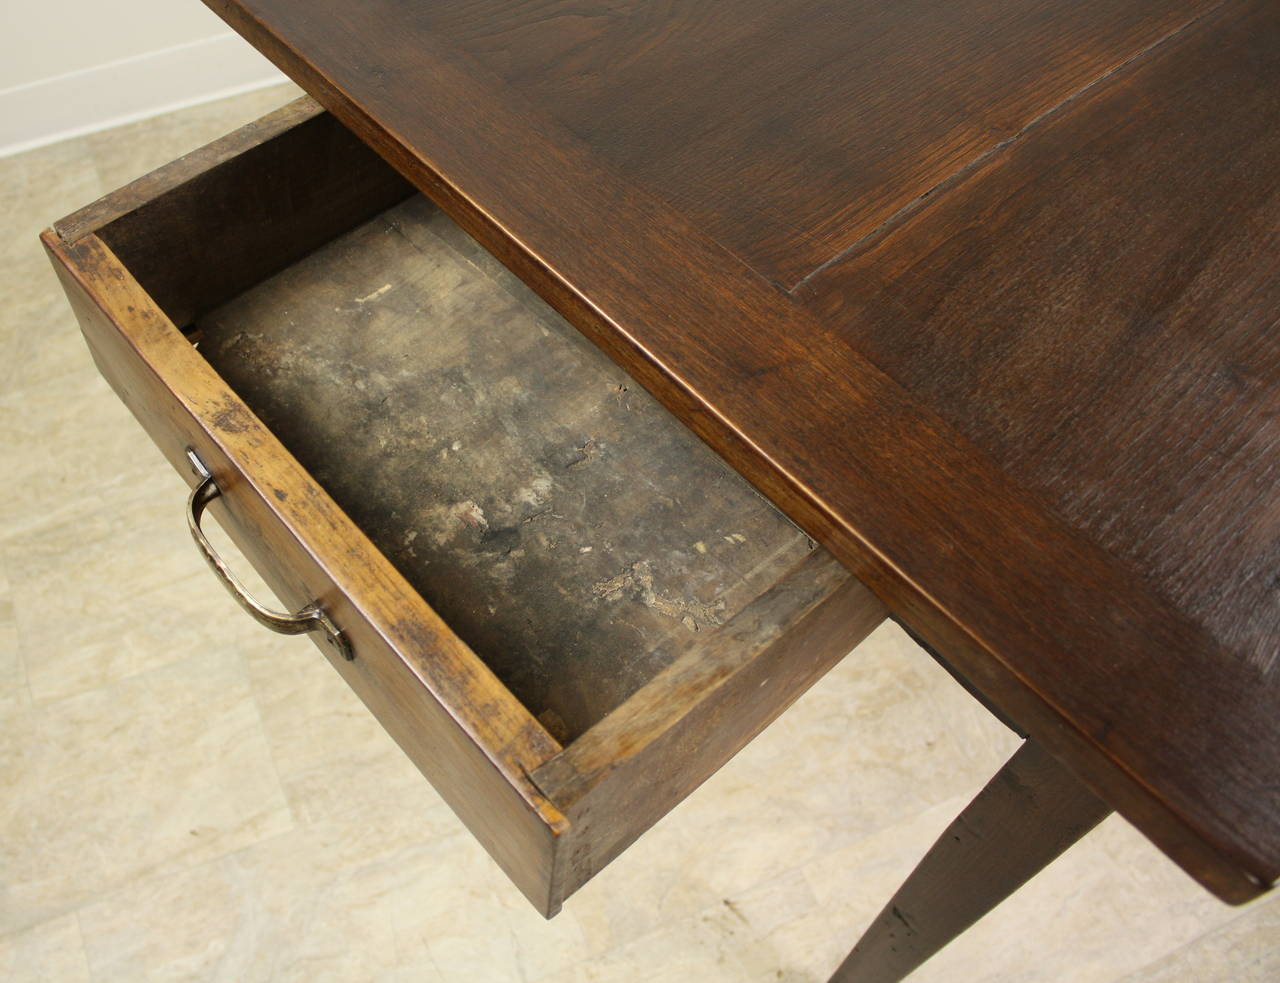 19th Century Antique French Farm Table